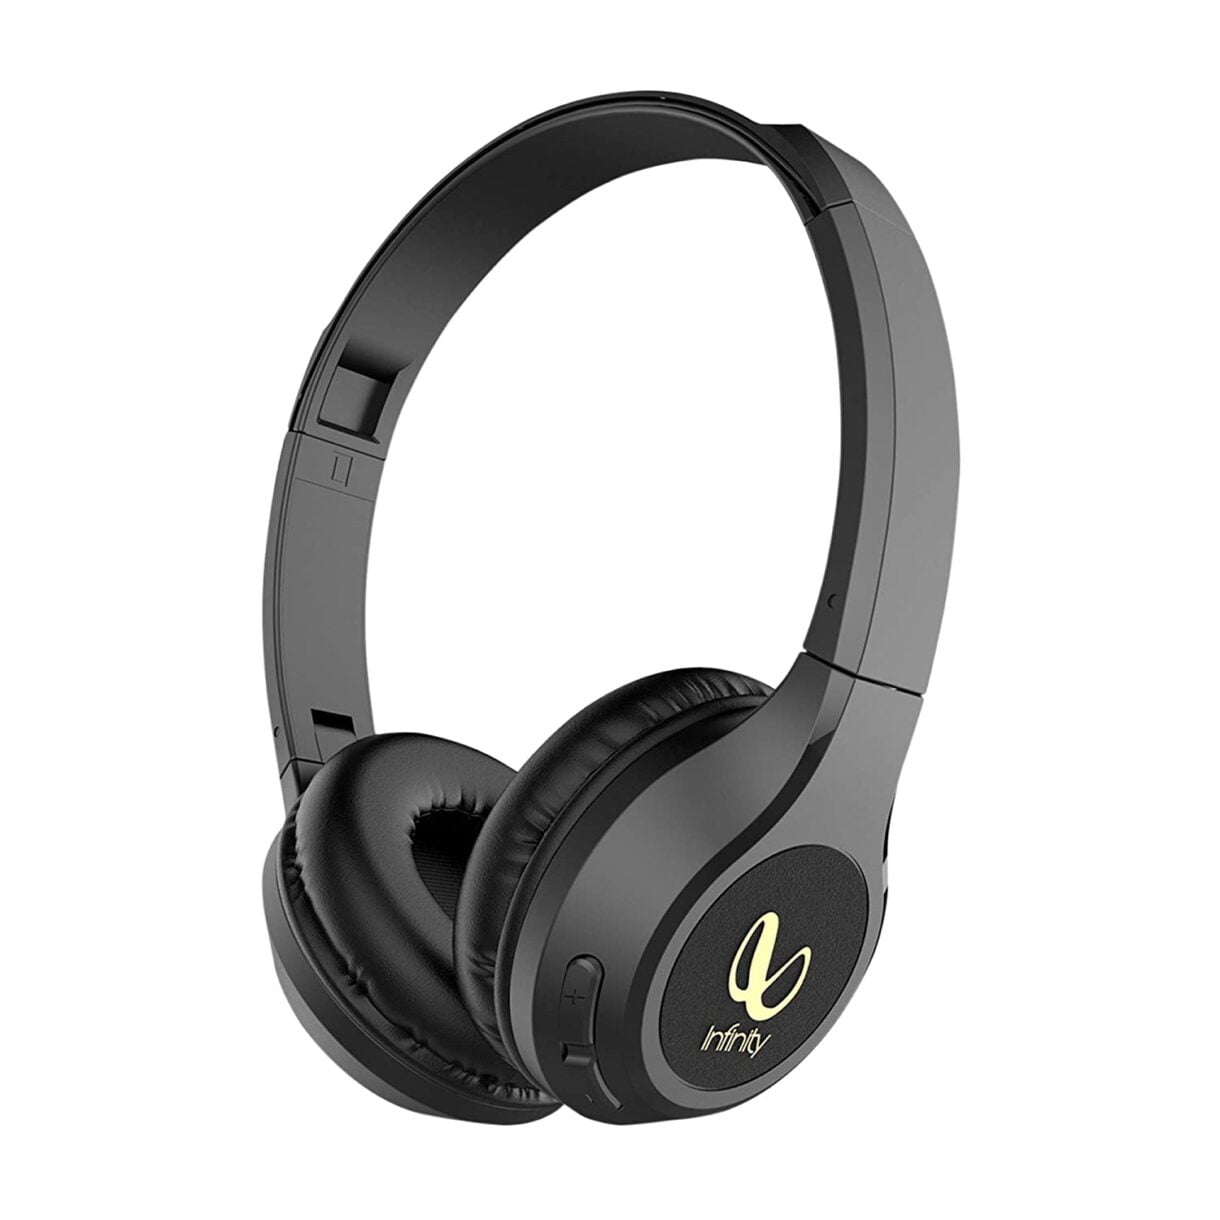 Infinity (JBL) Glide 500 Wireless Headphones with 20 Hours Playtime (Quick Charge), Deep Bass and Dual Equalizer